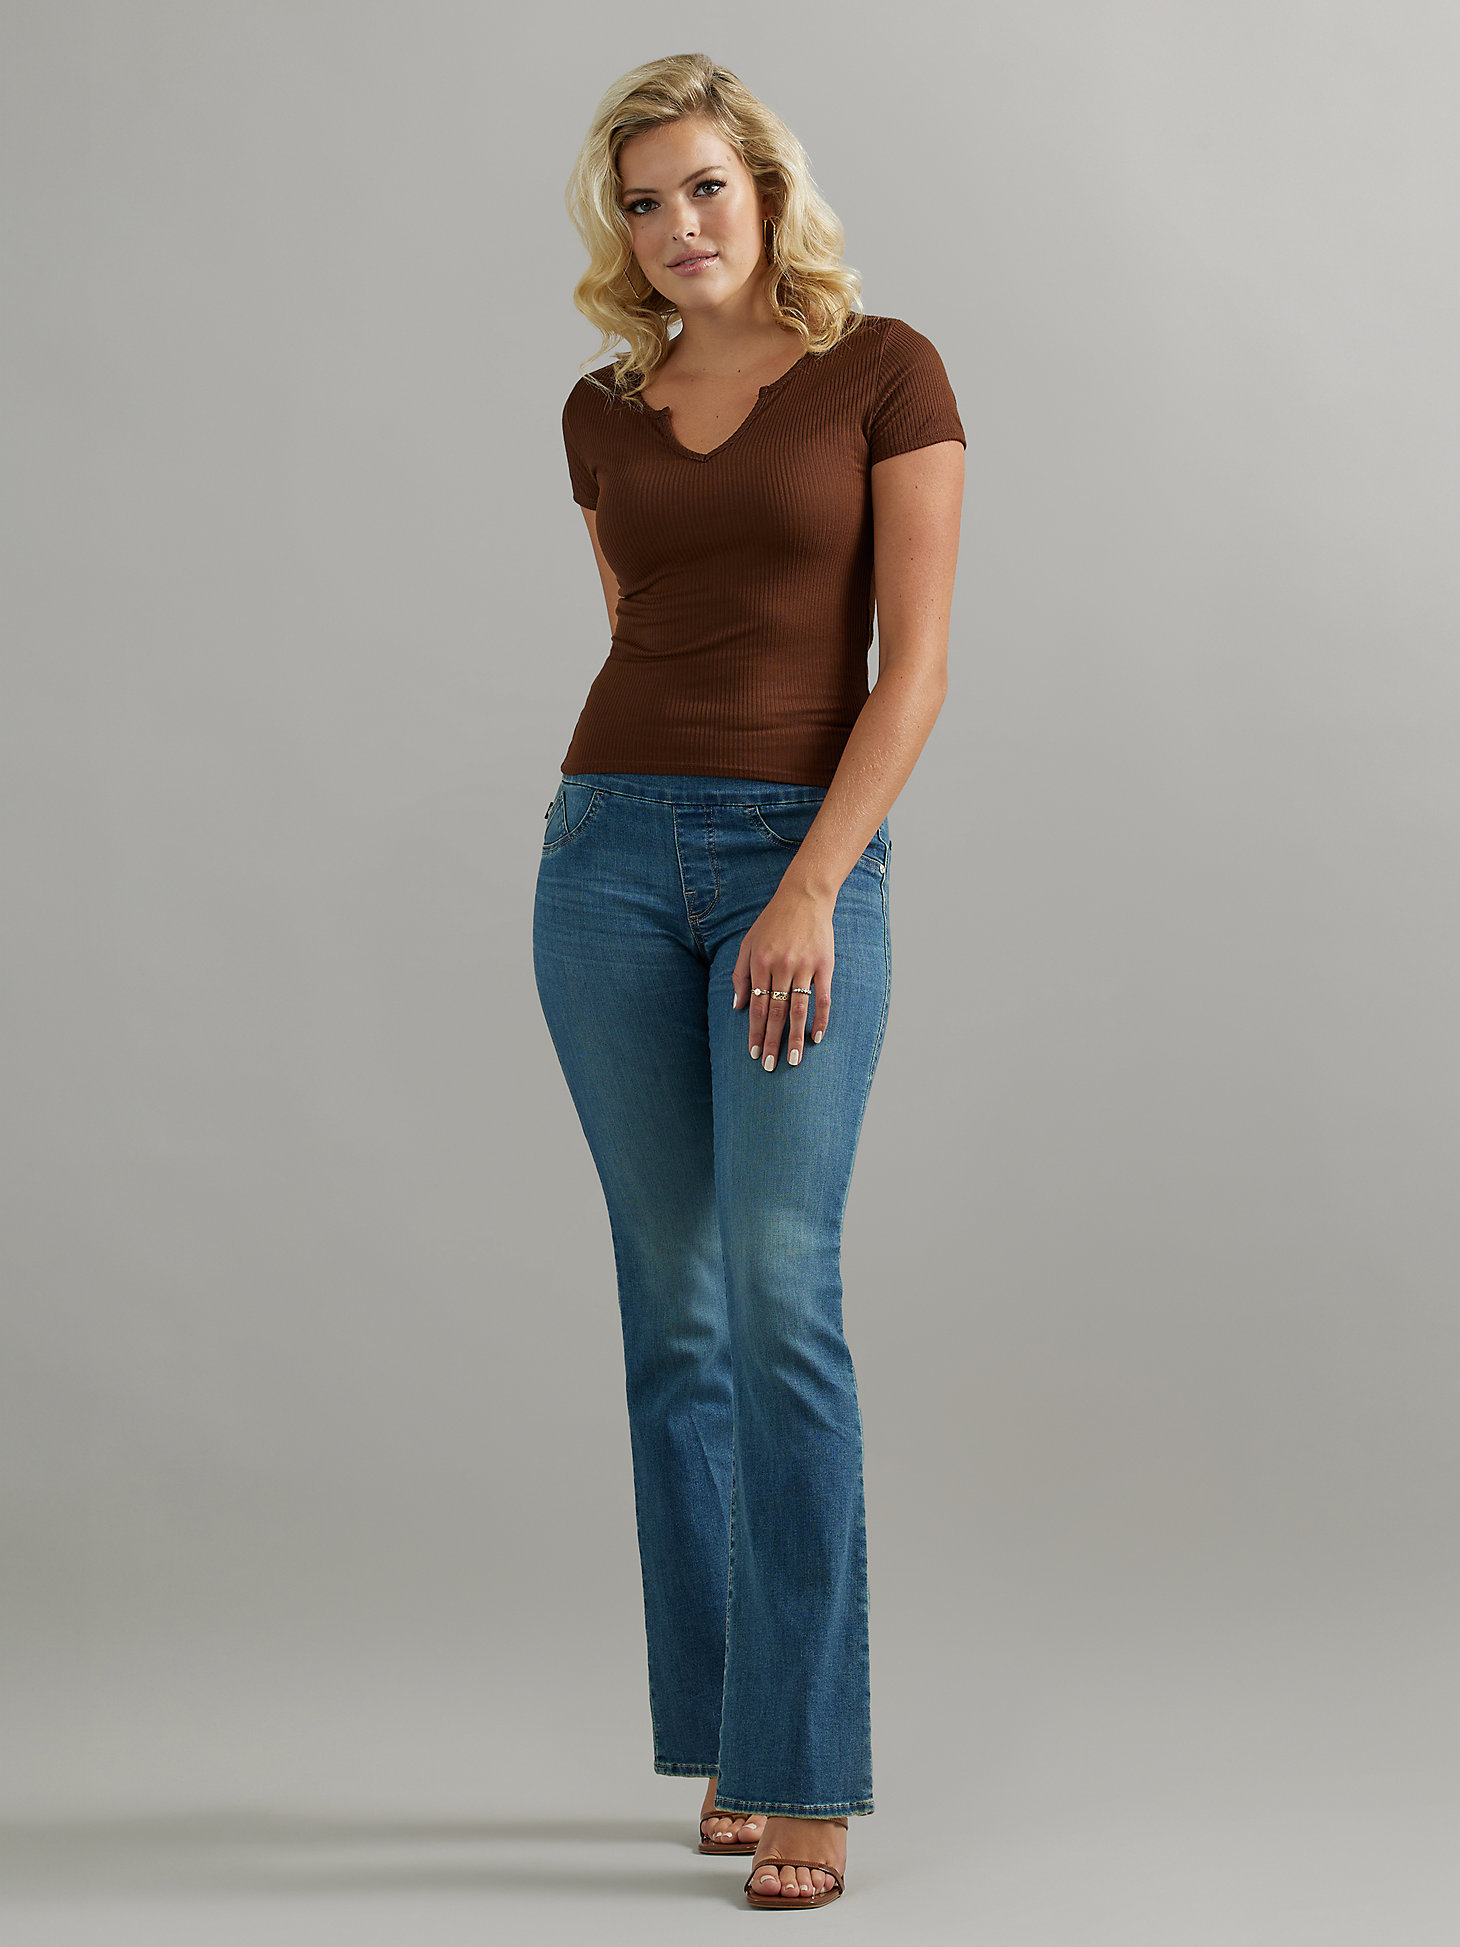 Women's Fever Bootcut Jean in That Girl main view